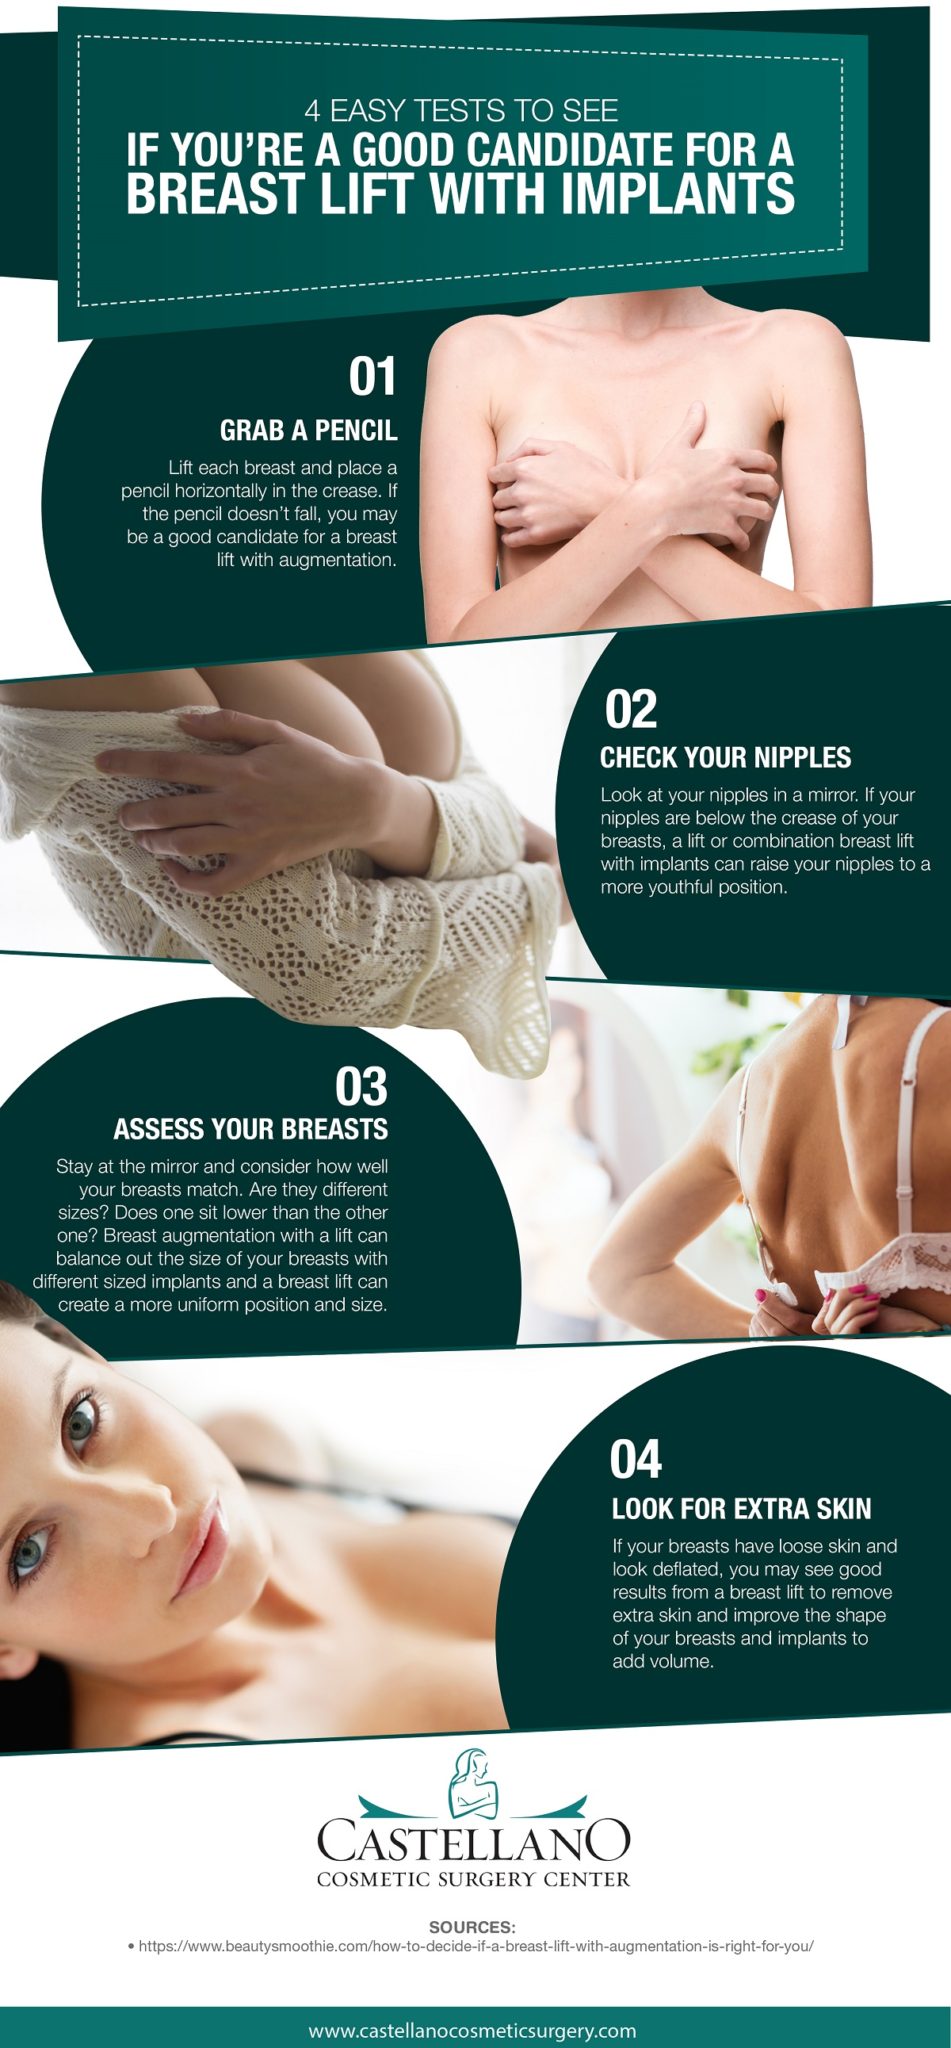 4 Easy Tests to See If You’re a Good Candidate for a Breast Lift with Implants [Infographic]